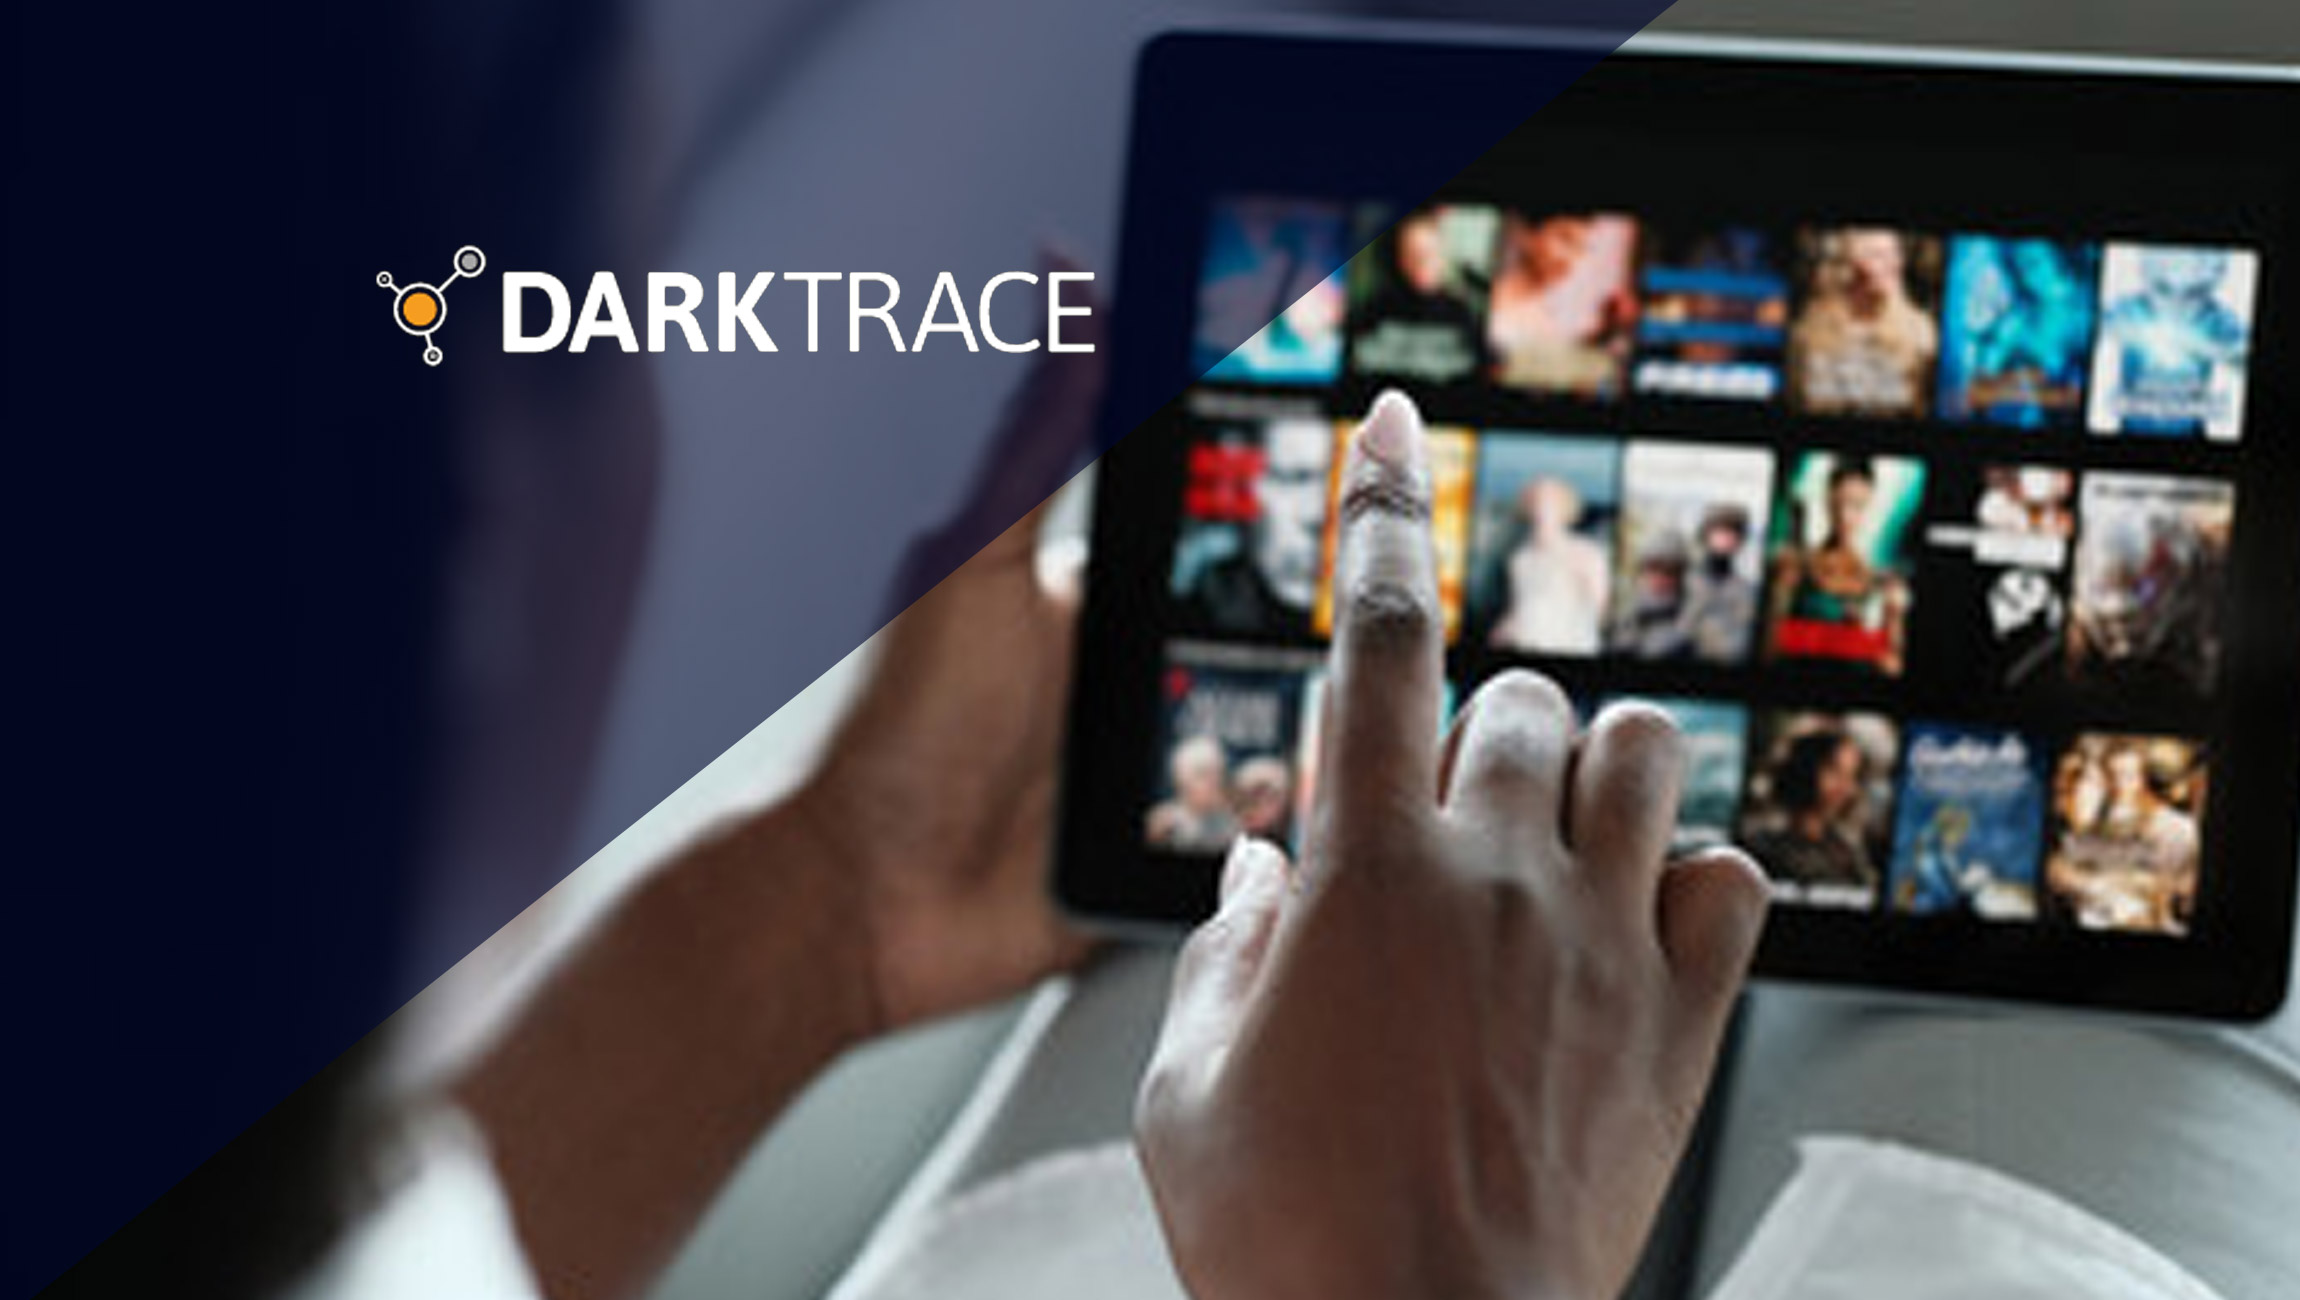 MEDIA-AND-ENTERTAINMENT-GIANT-SIGNIFICANTLY-EXPANDS-DARKTRACE-COVERAGE-ACROSS-ITS-BUSINESS